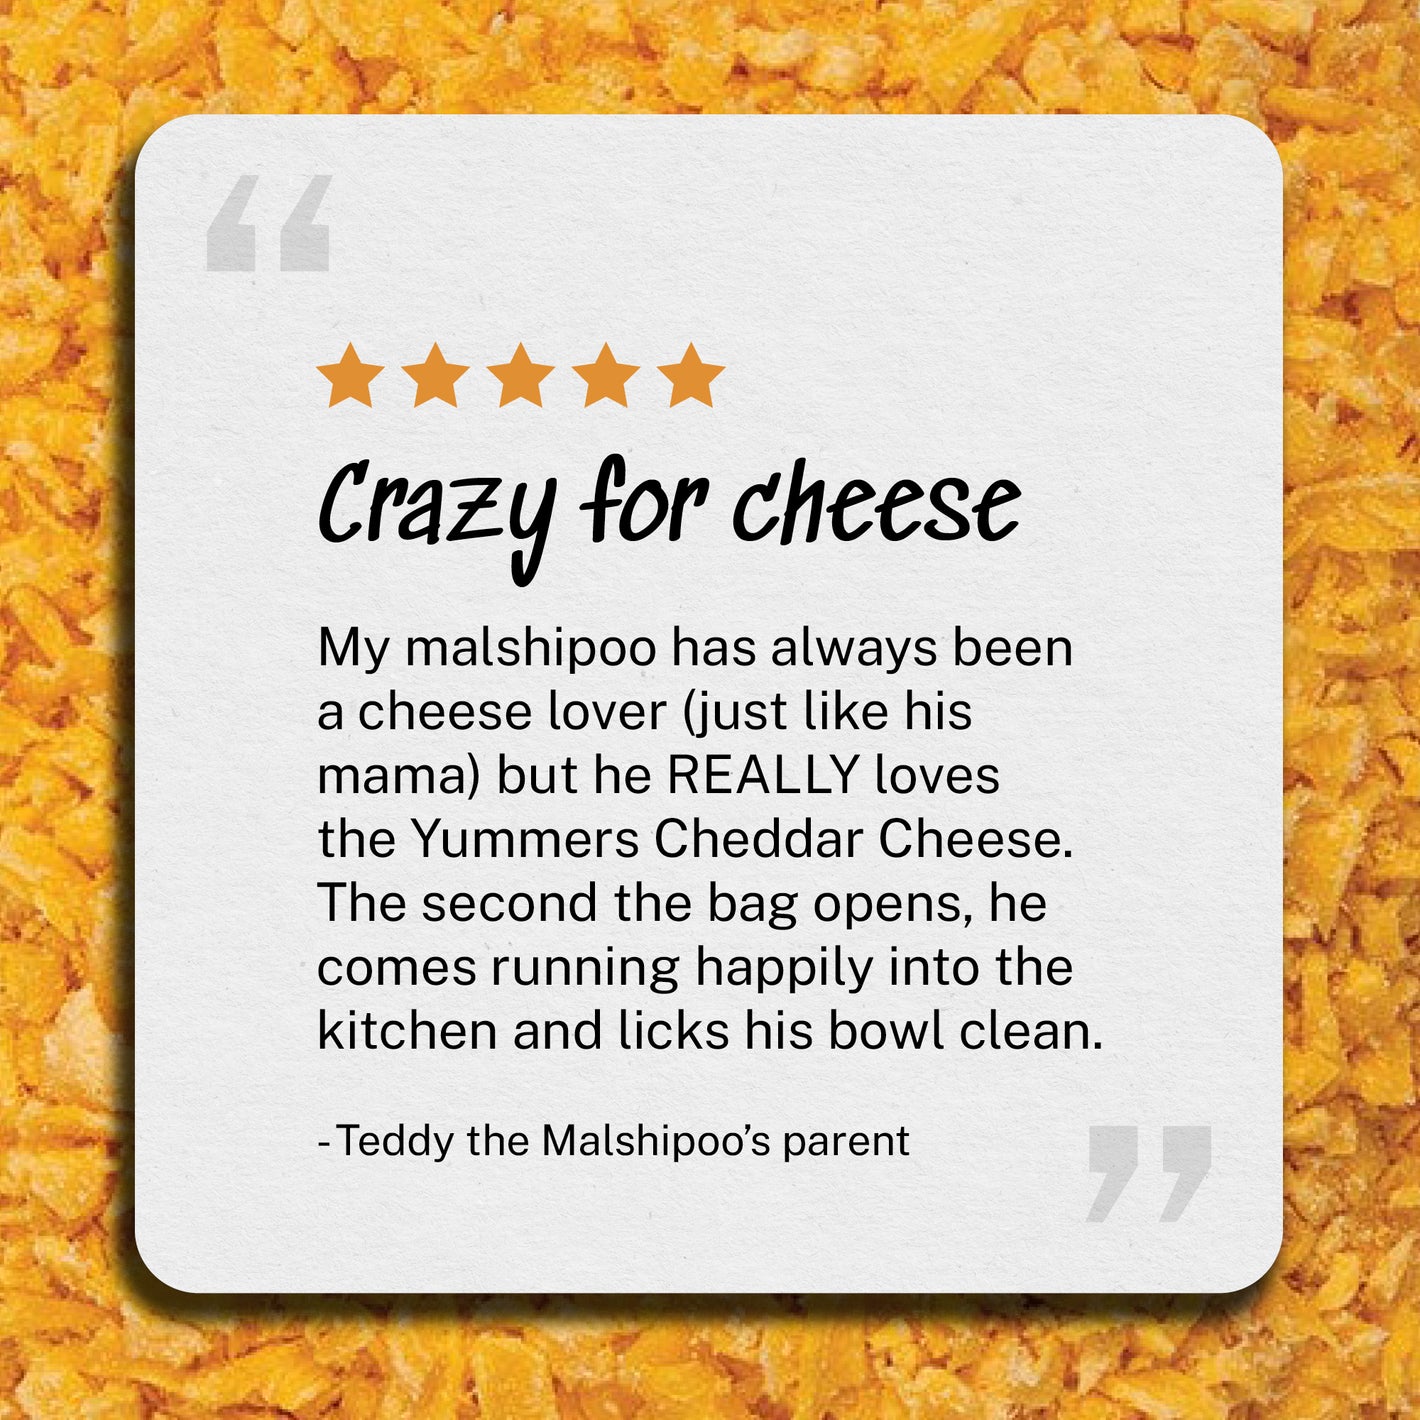 Crazy for cheese. My malshipoo has always been a cheese lover (just like his mama) but he REALLY loves the Yummers Cheddar Cheese. The second the bag opens, he comes running happily into the kitchen and licks his bowl clean. -Teddy the Malshipoo’s parent